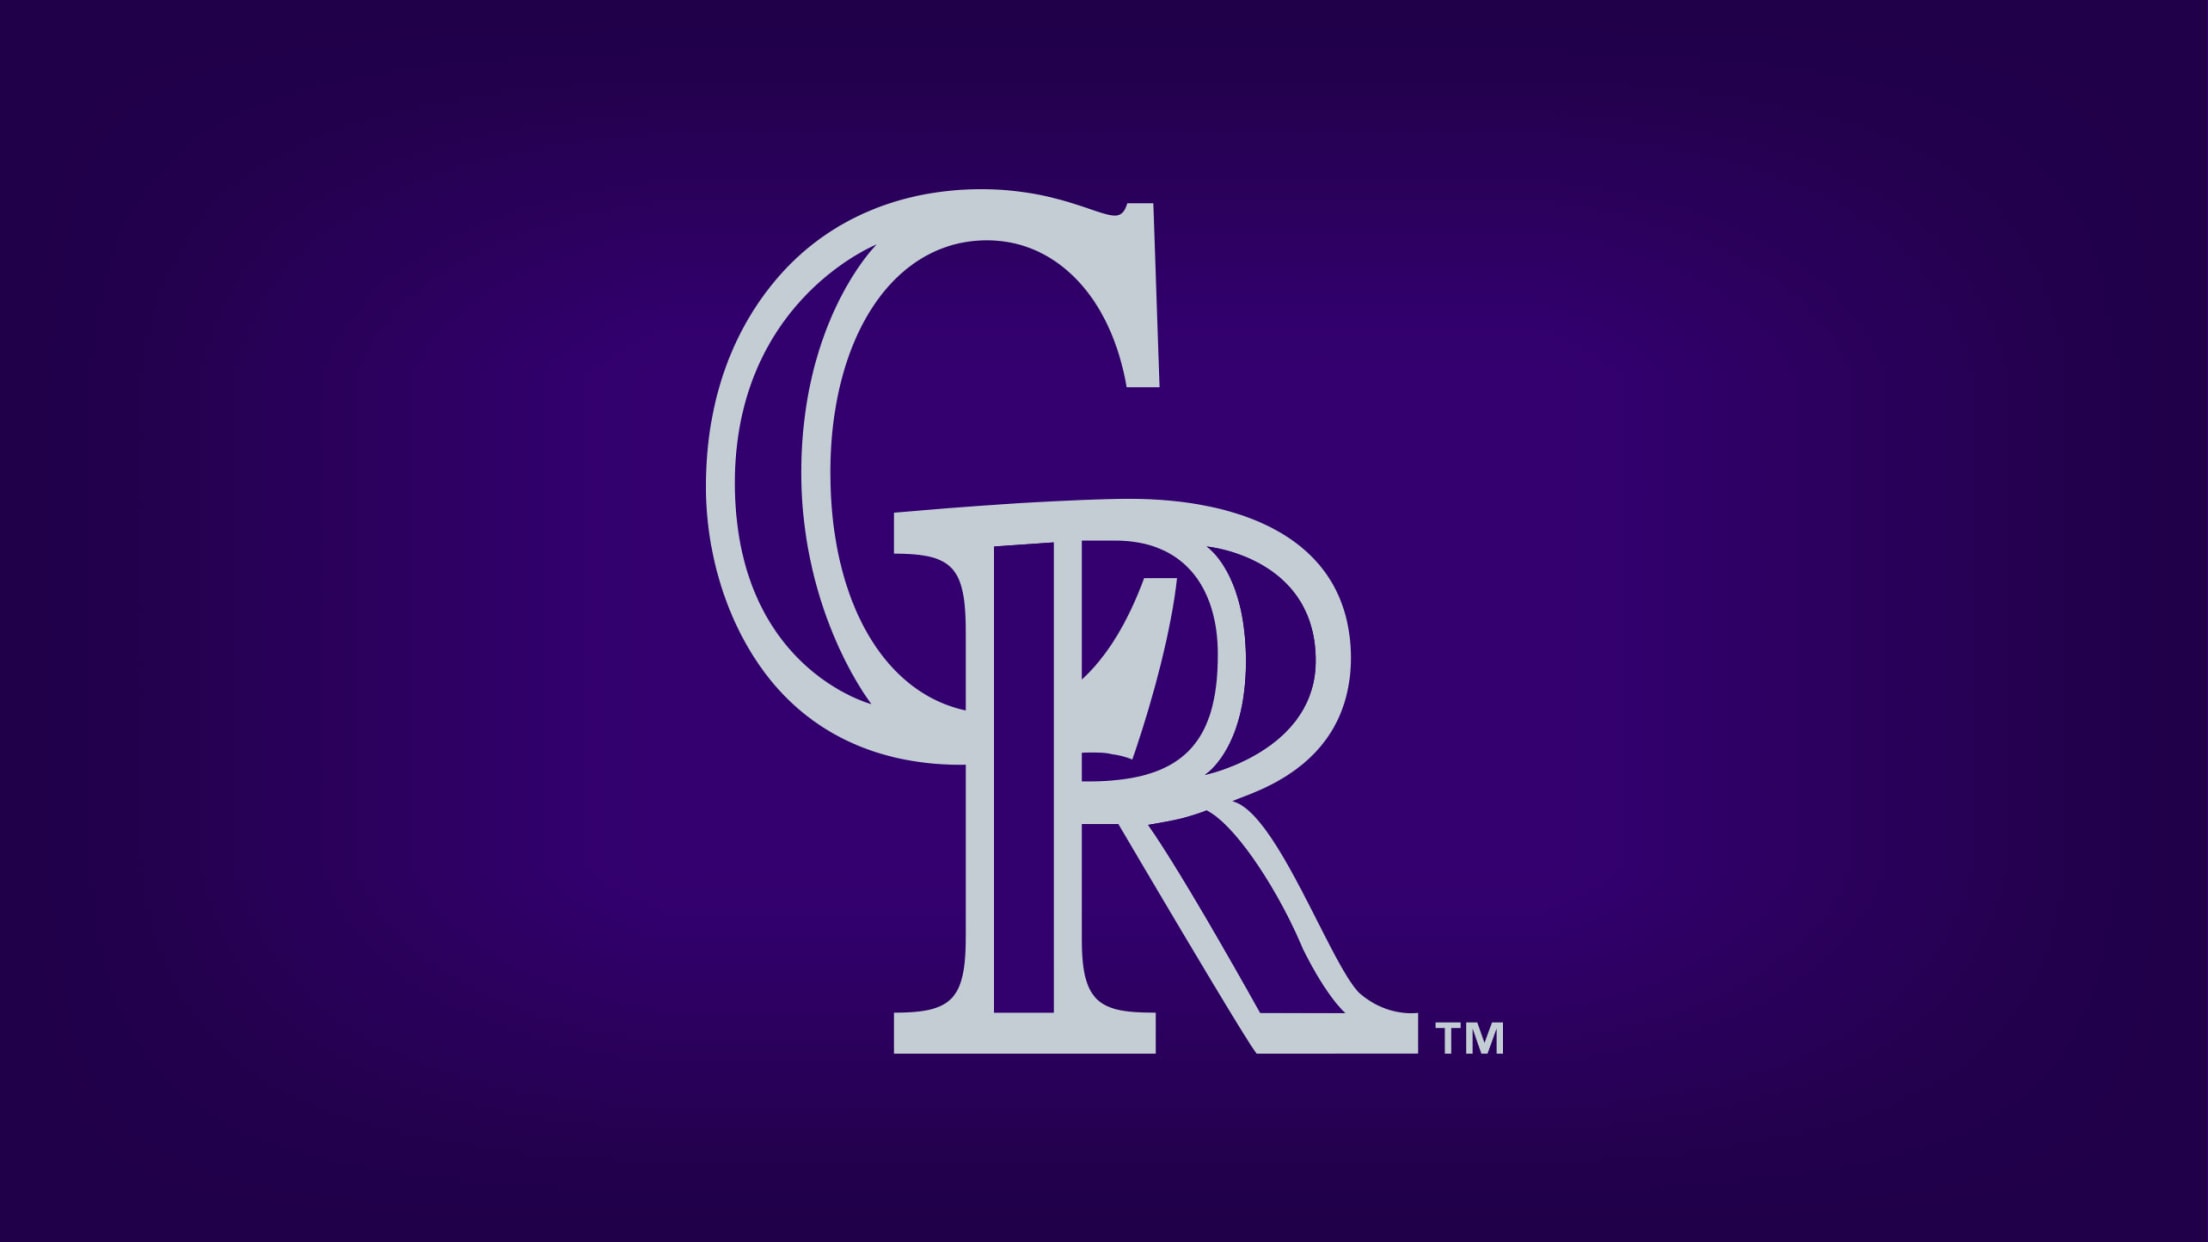 Colorado Rockies - OFFICIAL: We're now the exclusive provider of